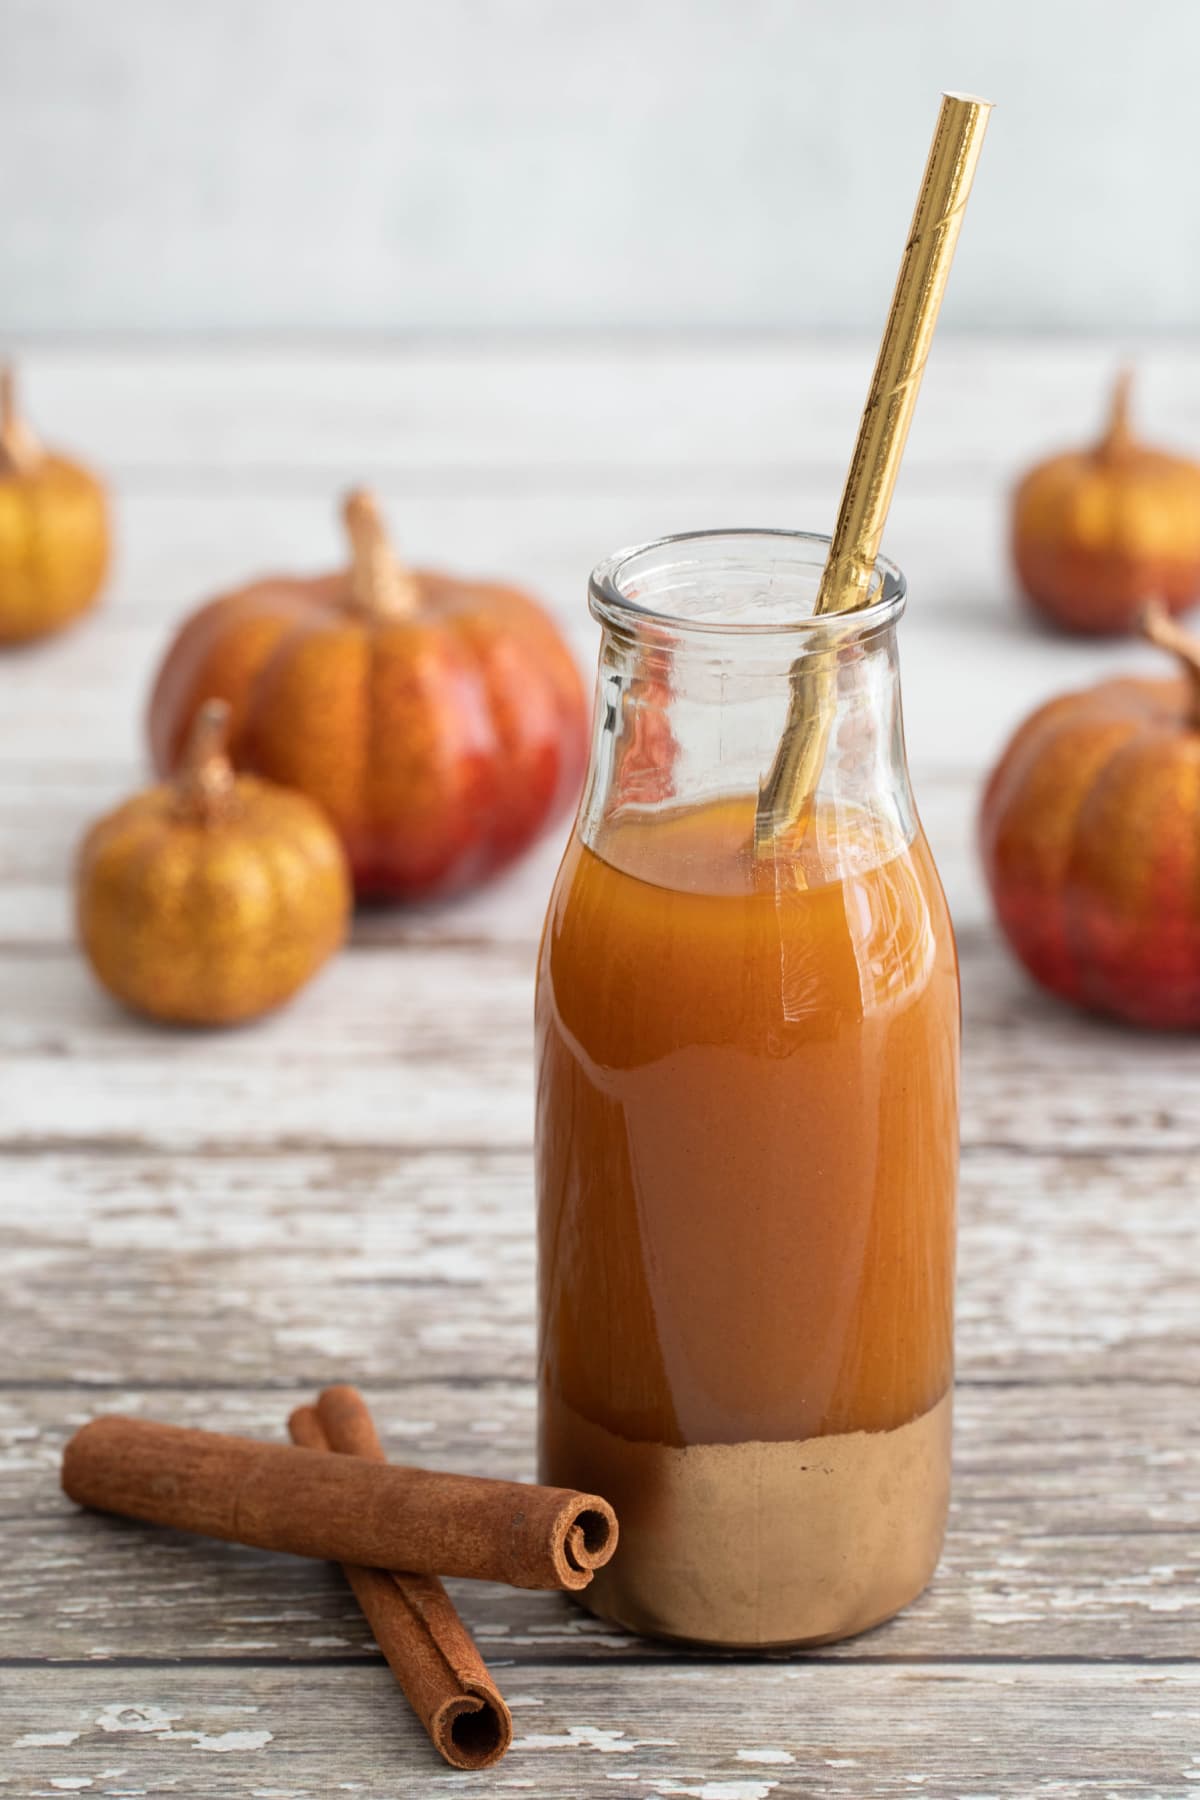 Pumpkin juice with gold straw